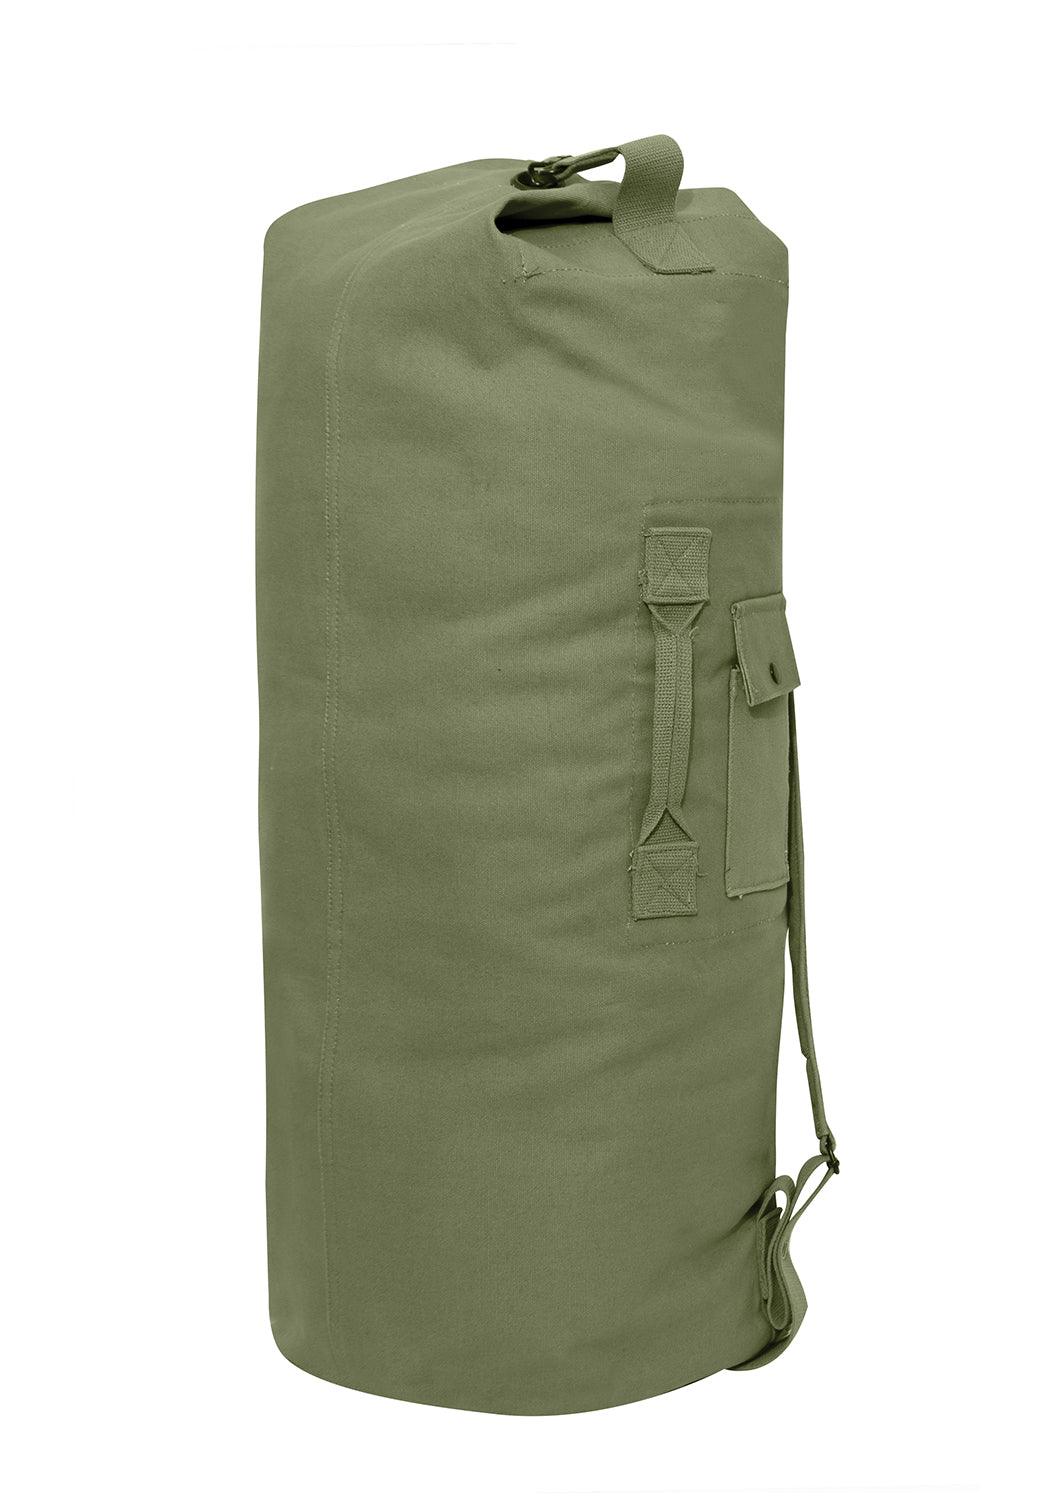 G.I. Style Canvas Double Strap Duffle Bag by Rothco - Legendary USA